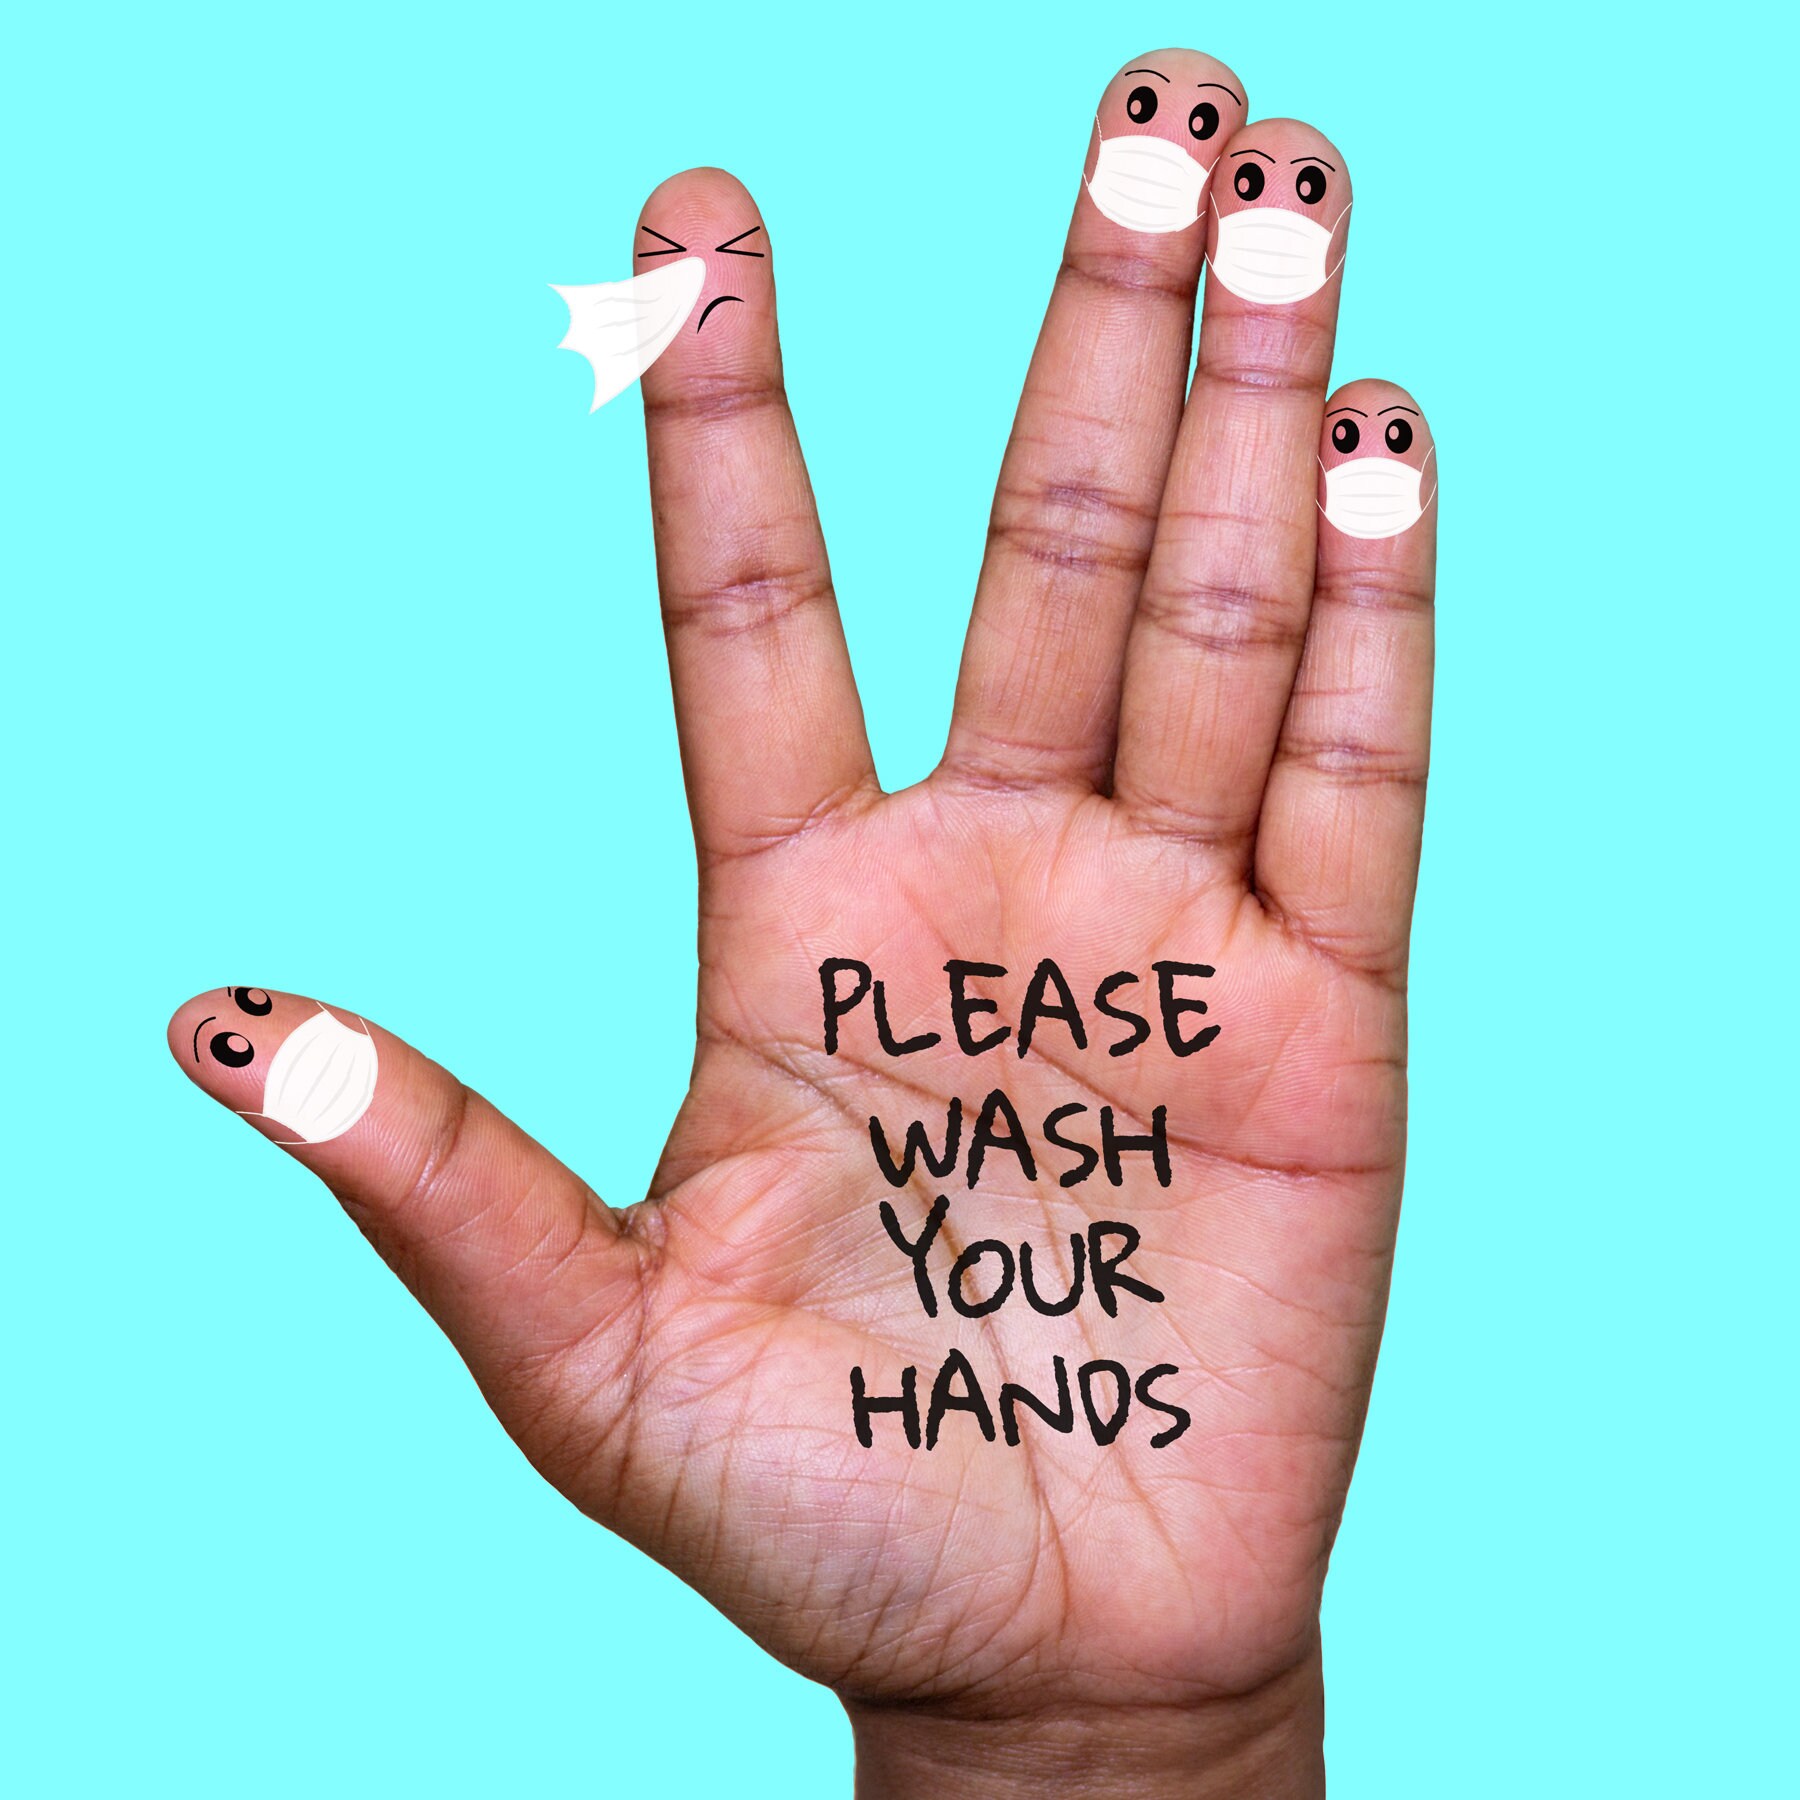 New hand wash offers employees a second chance